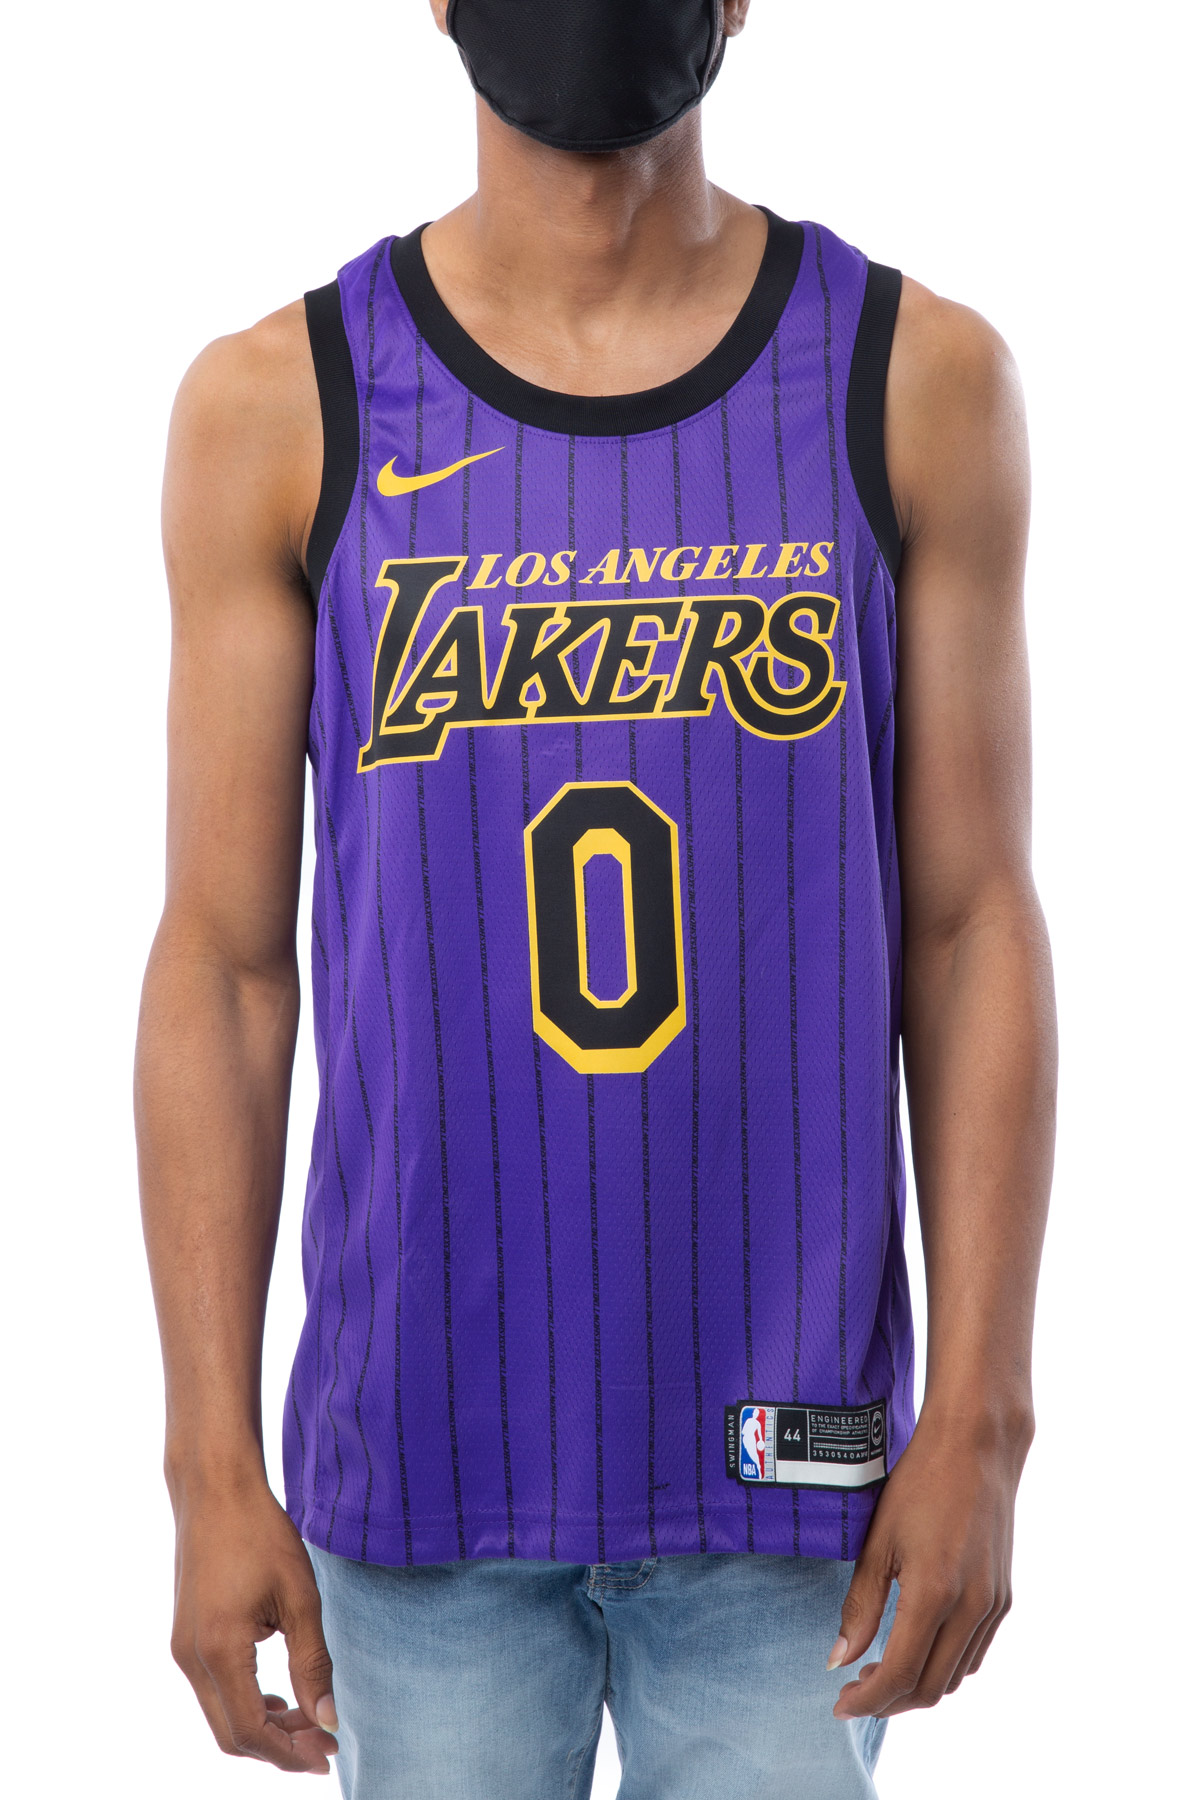 2018 lakers city edition jersey